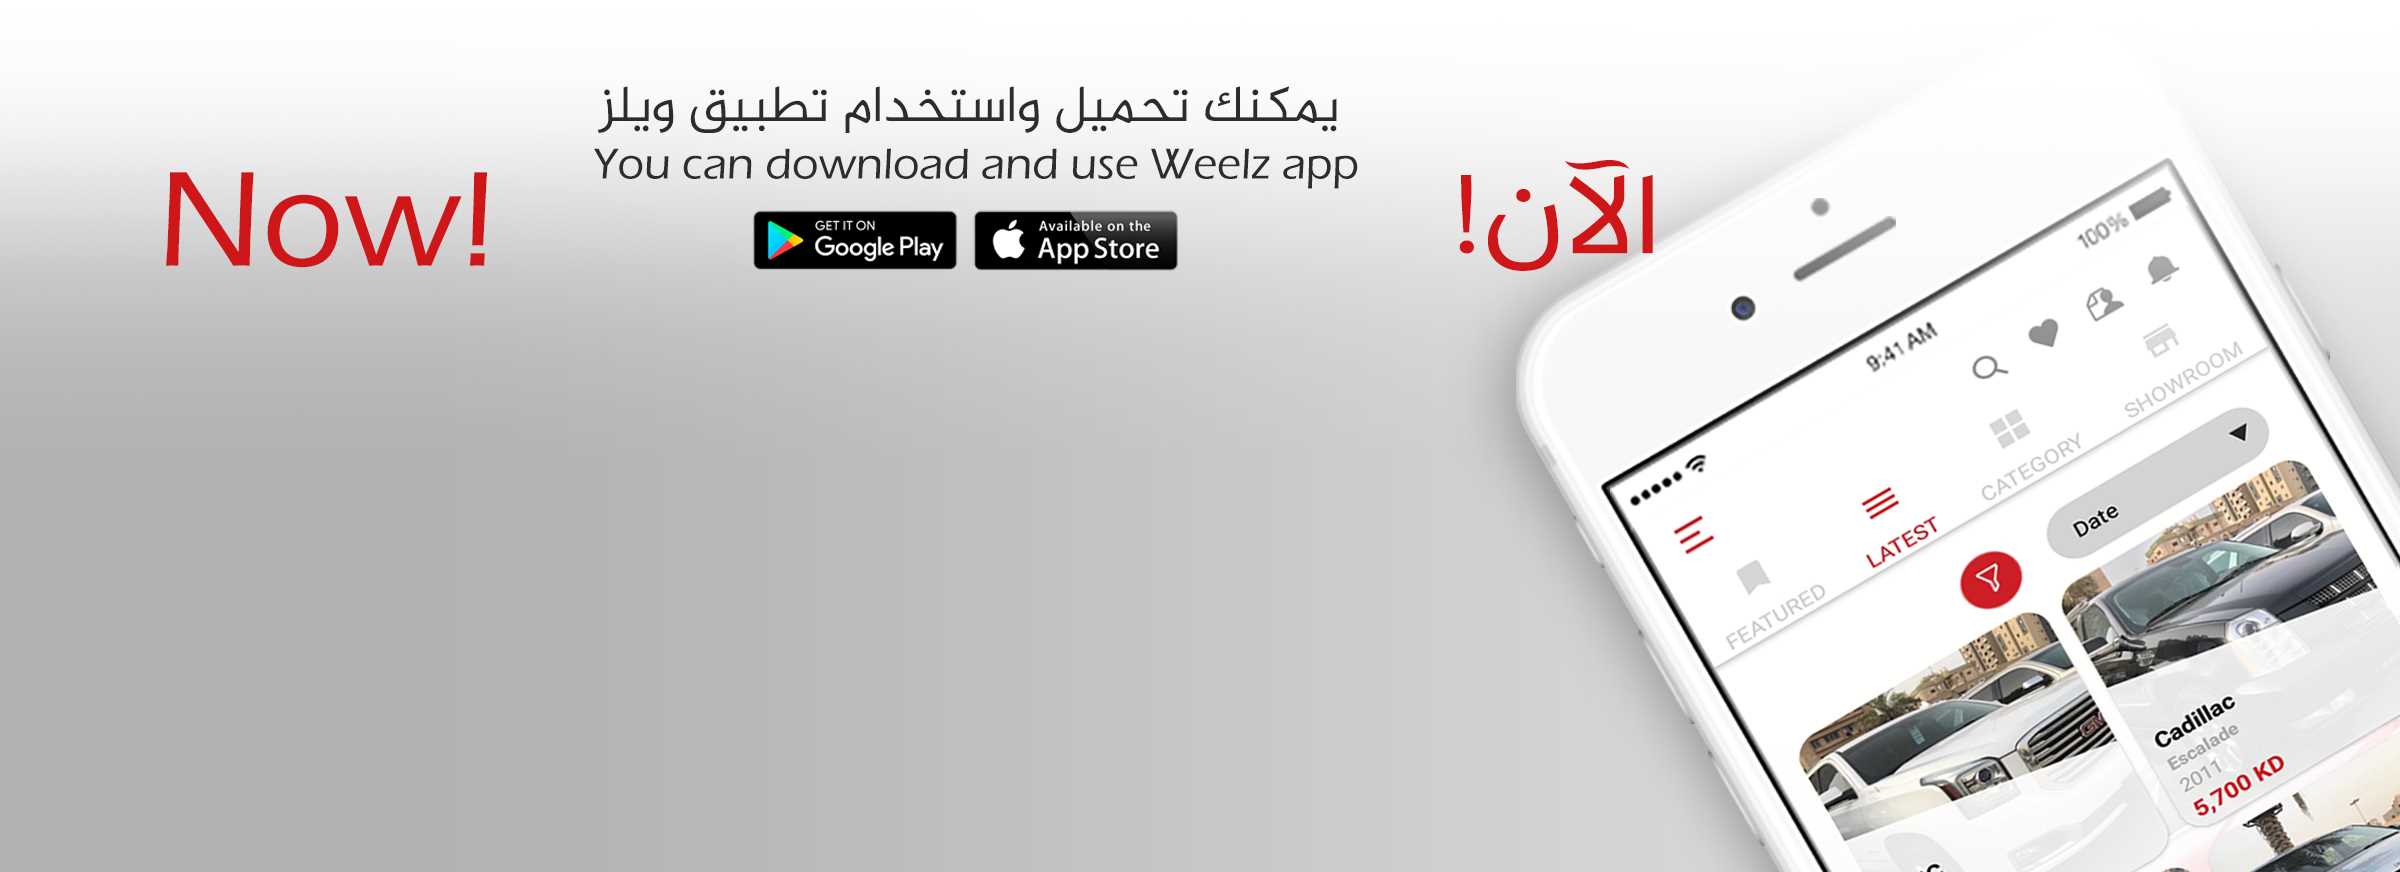 App available